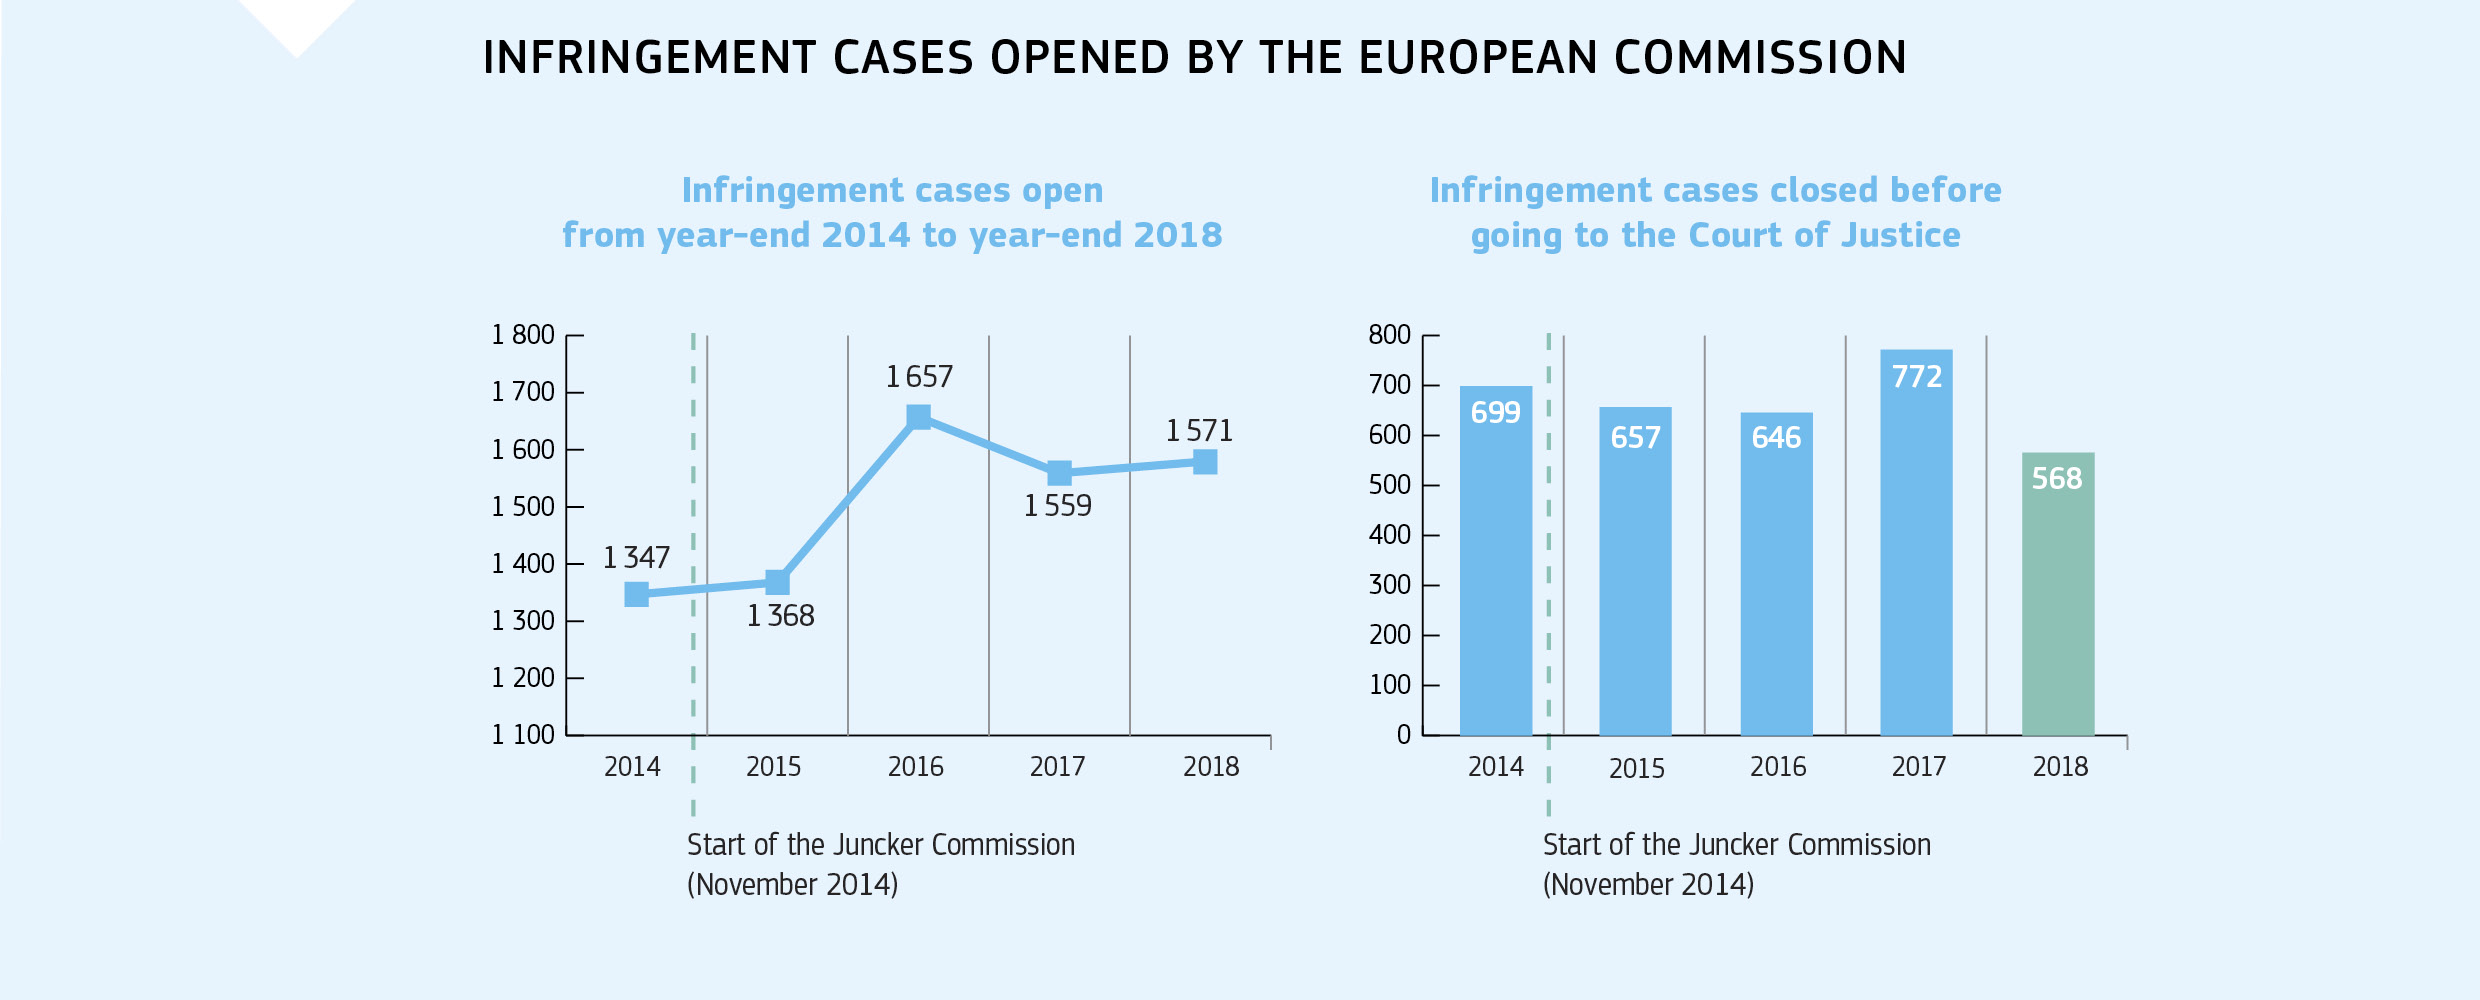 INFRINGEMENT CASES OPENED BY THE EUROPEAN COMMISSION